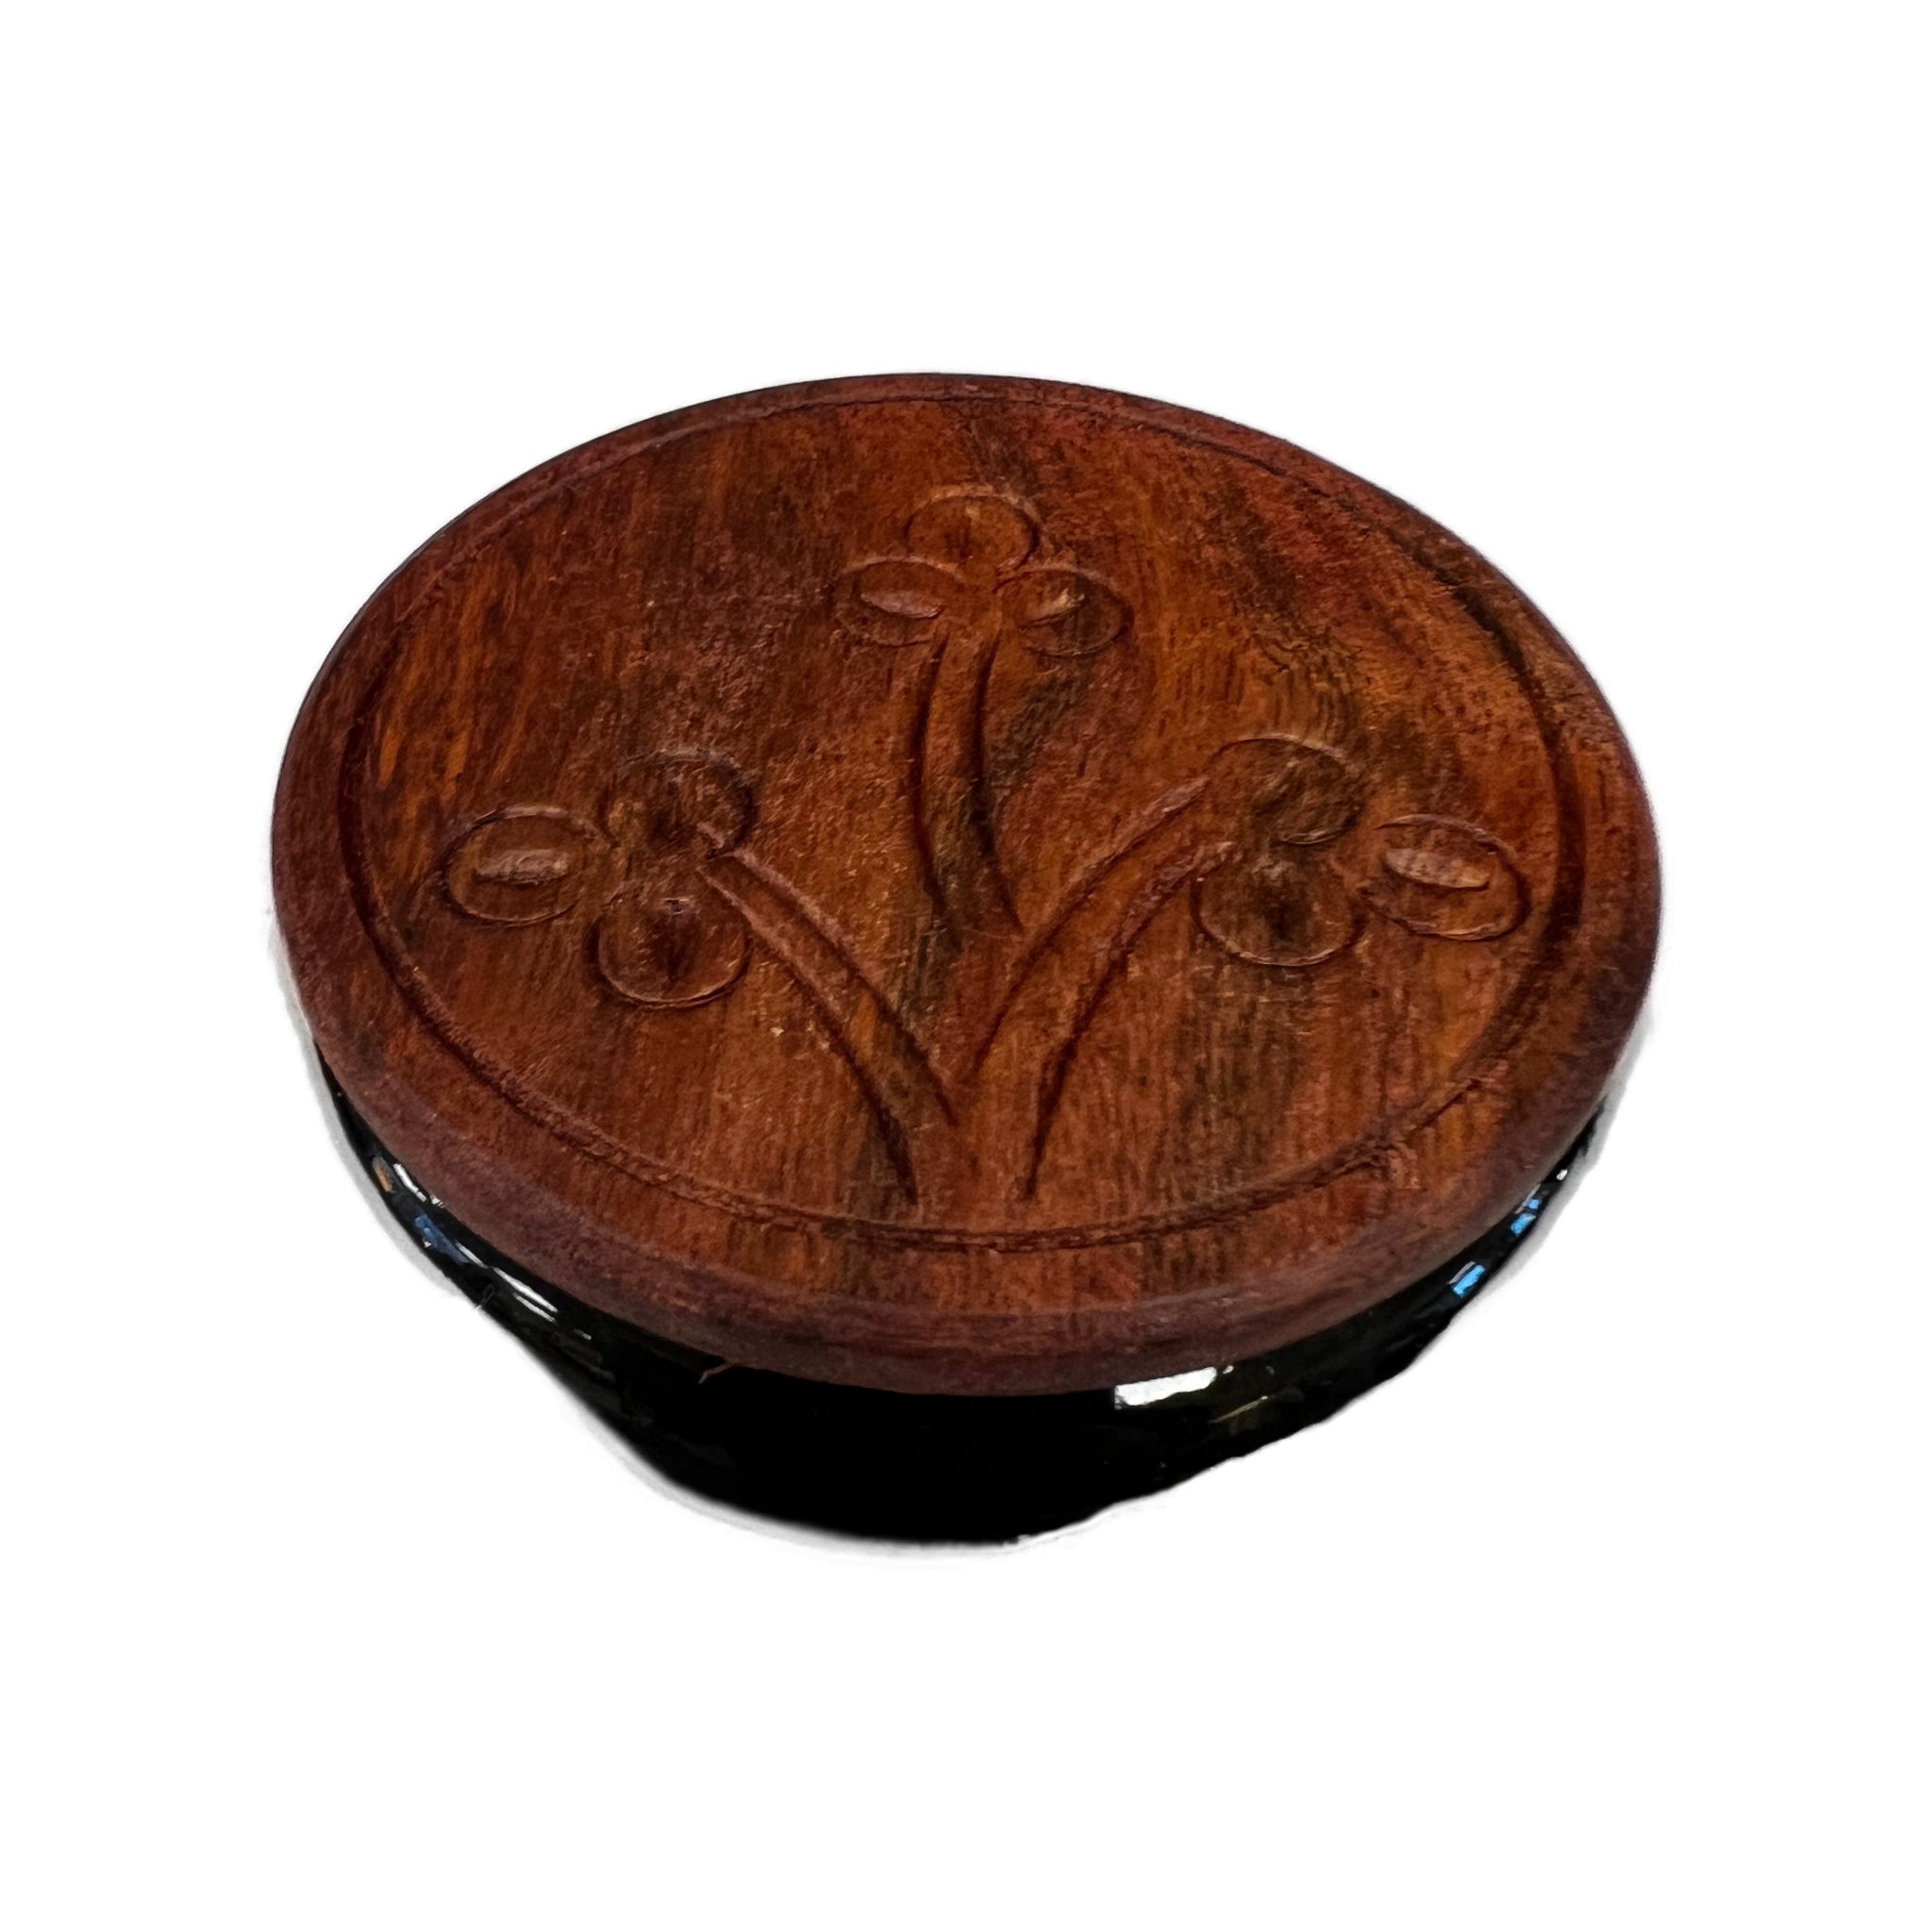 Round black metal bowl with wooden top flowers engraved 